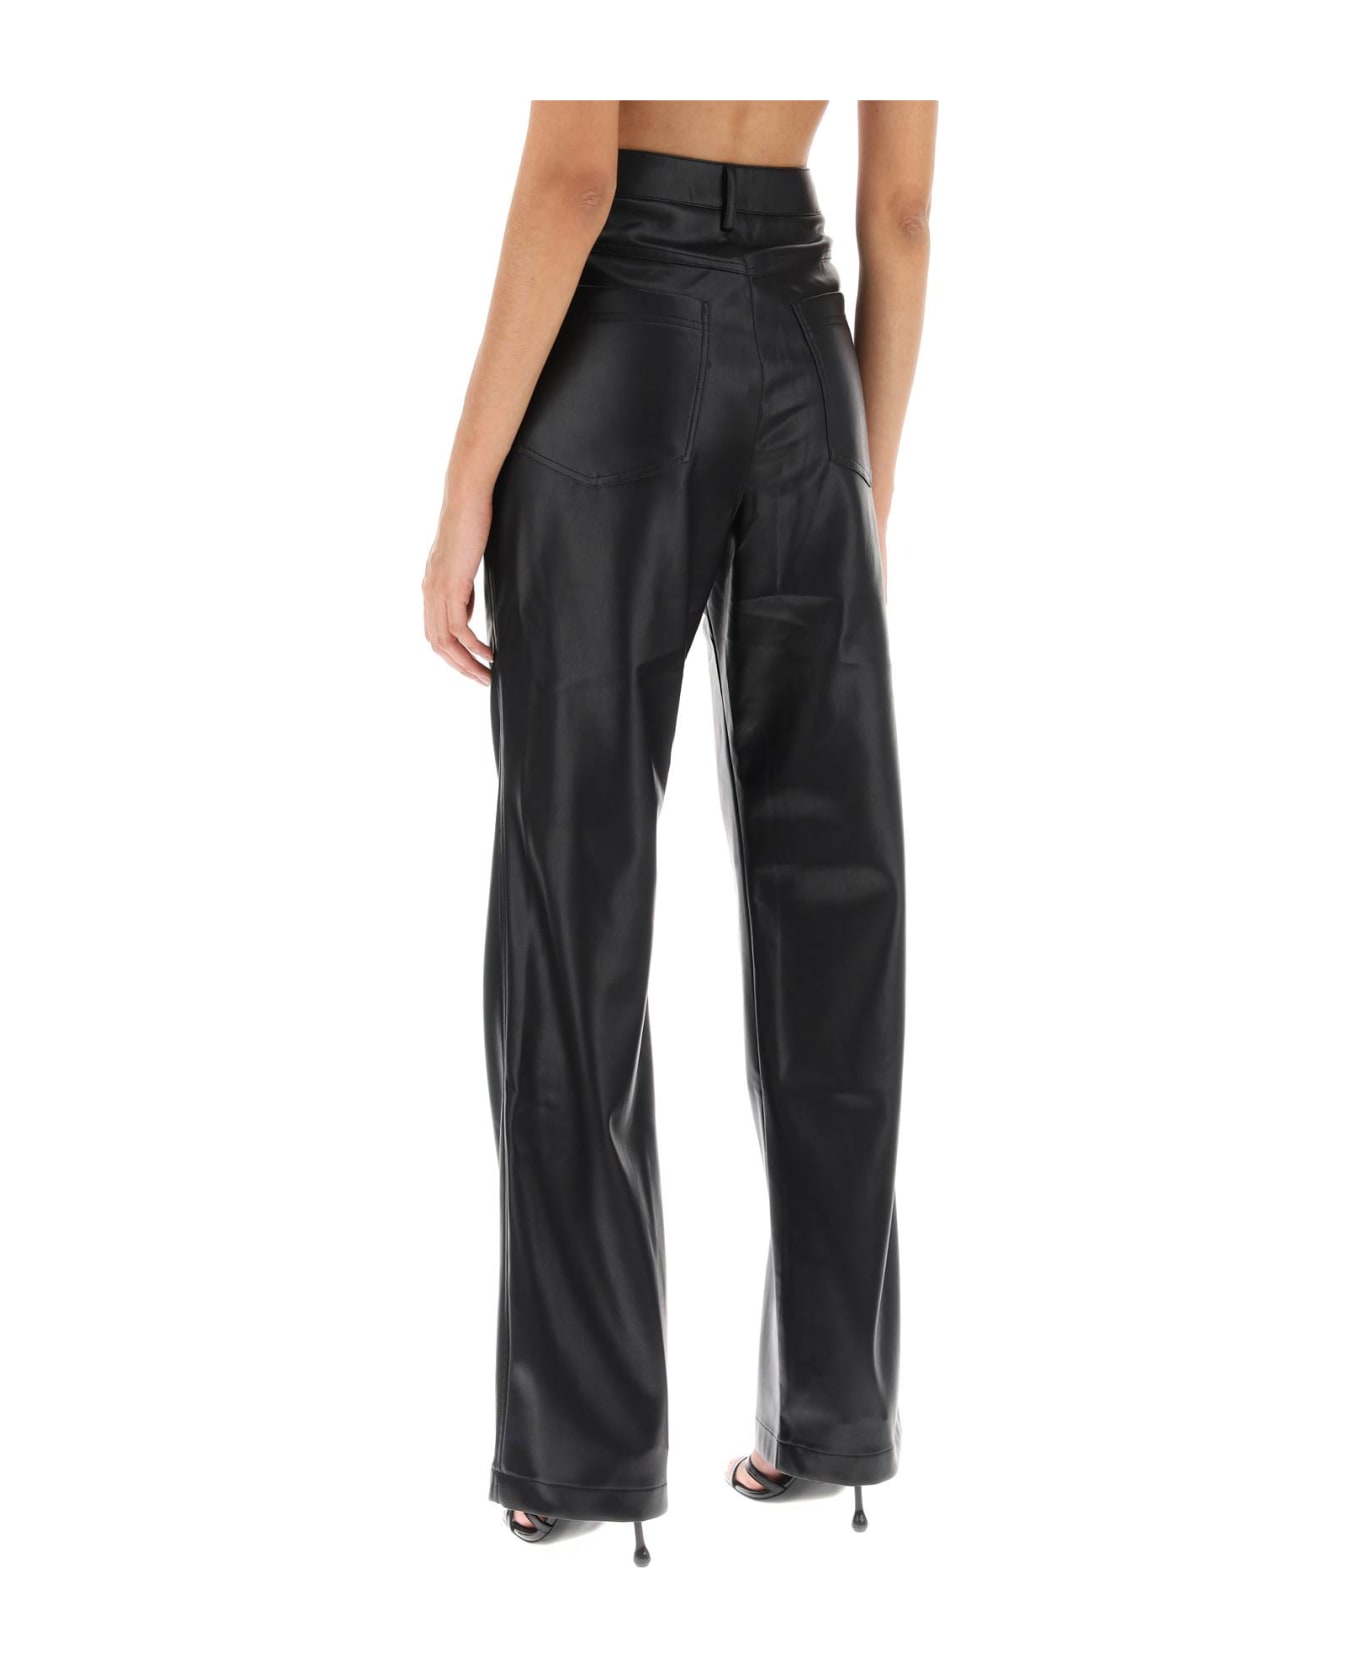 Rotate by Birger Christensen Embellished Button Faux Leather Pants - BLACK (Black)